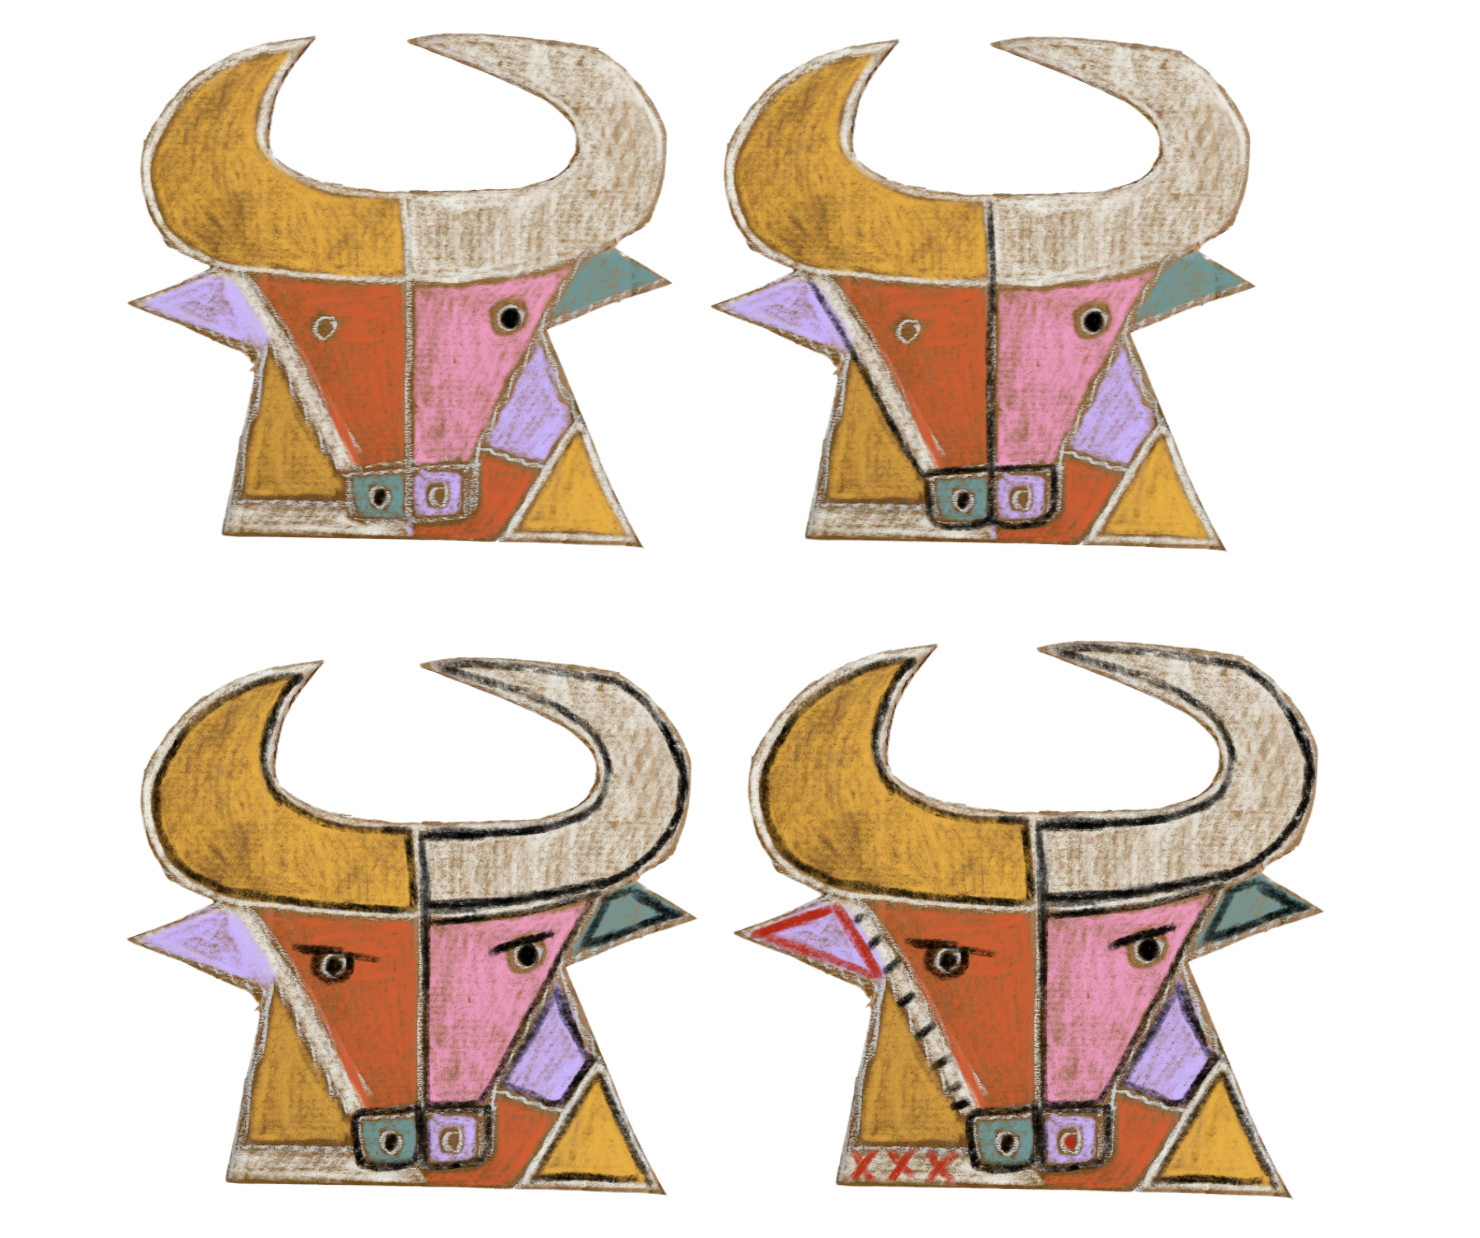 Picasso Art Project for kids: Abstract bulls — ART CAMP